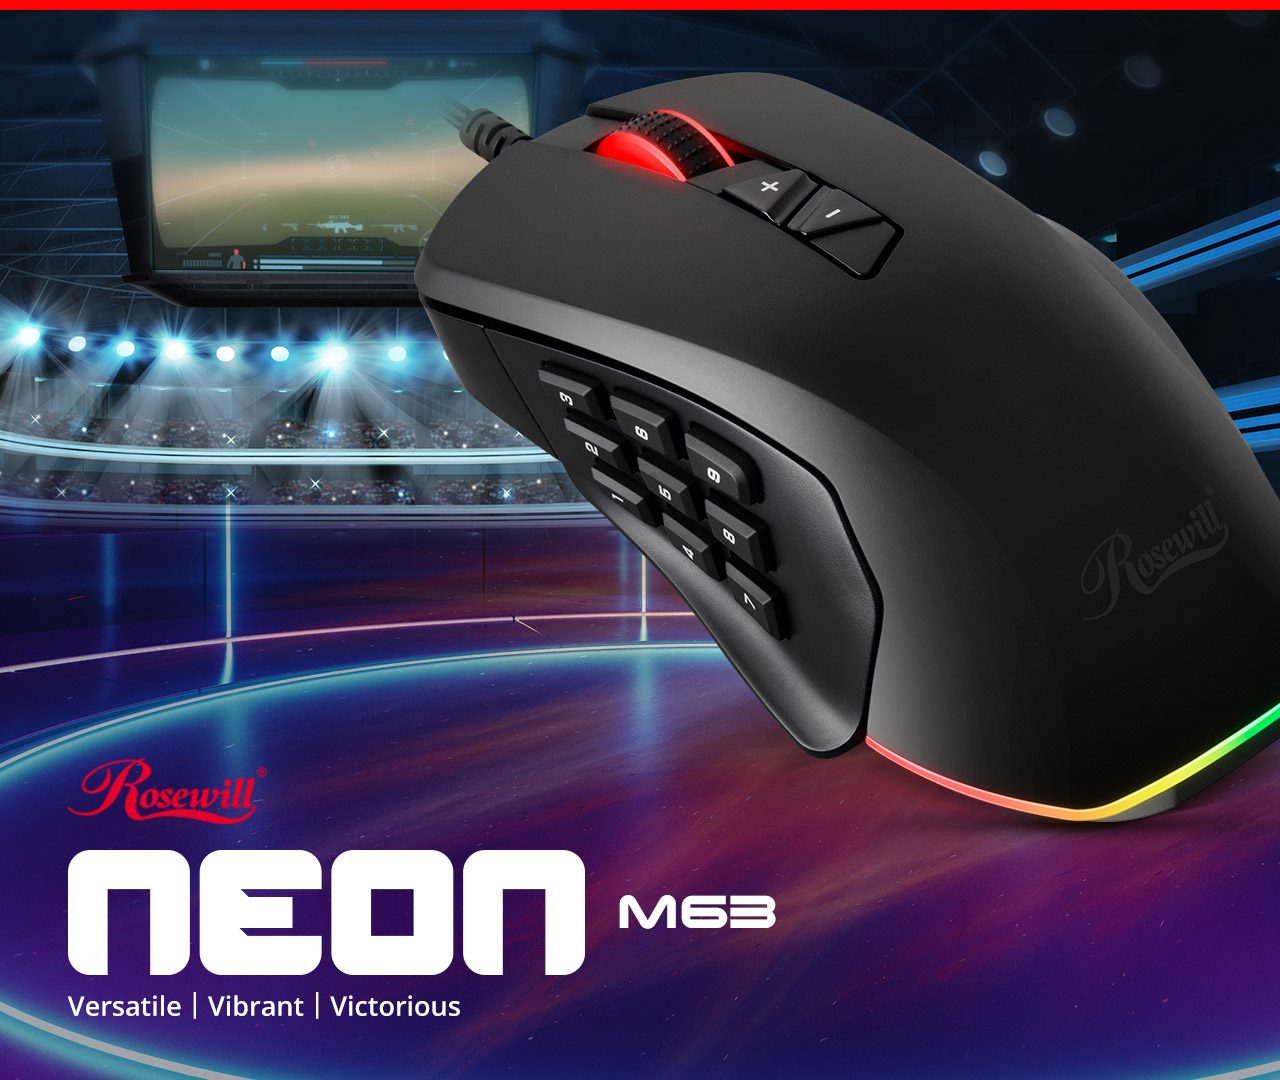 Rosewill RGB Gaming Mouse with Interchangeable Side Plates Angled Up to the Left in Front of an E-Sports Stadium, Next to Text that reads: Rosewill NEON M63 - Versatile | Vibrant | Victorious